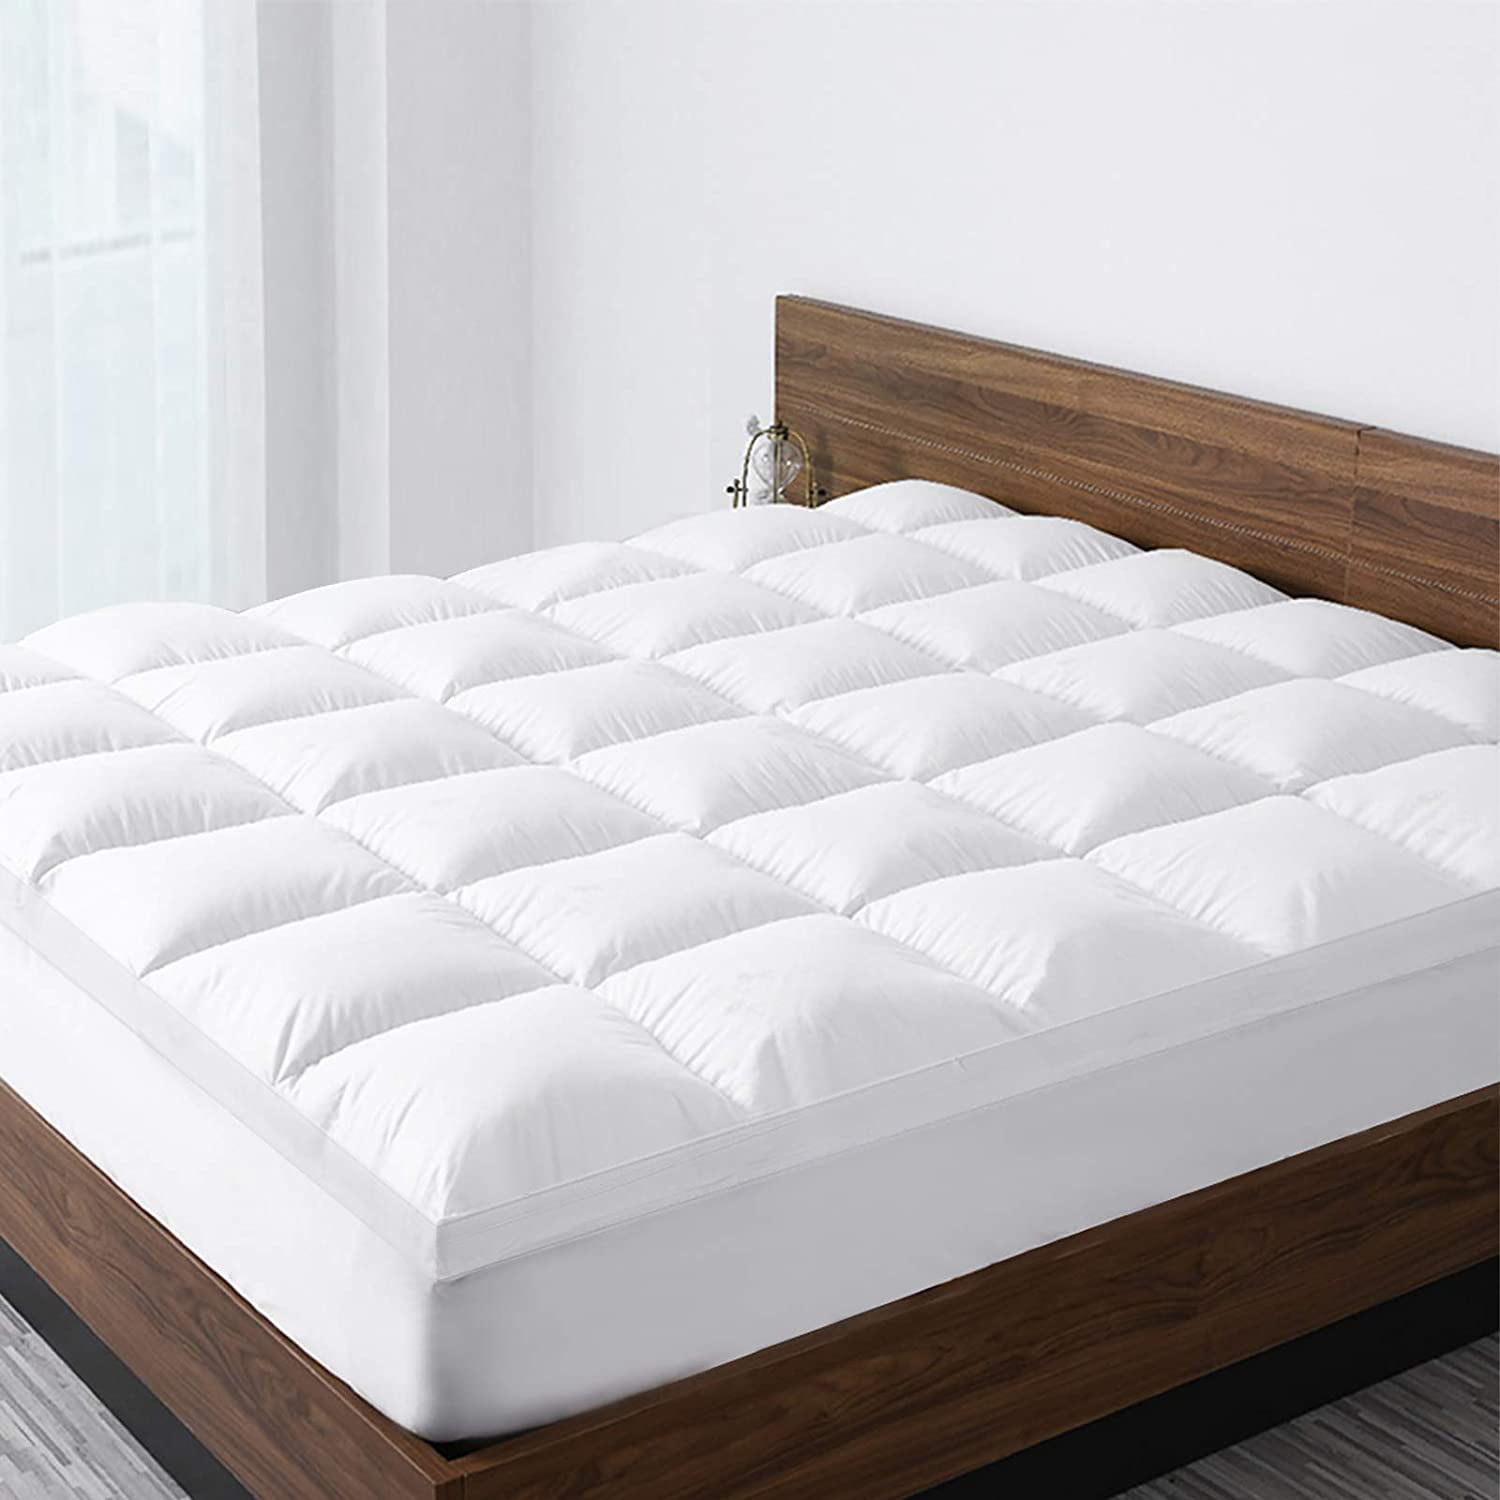 Details about   New Extra Thick Pillow Top Pad Topper Bed Cover Queen Size  Memory Foam Mattress 